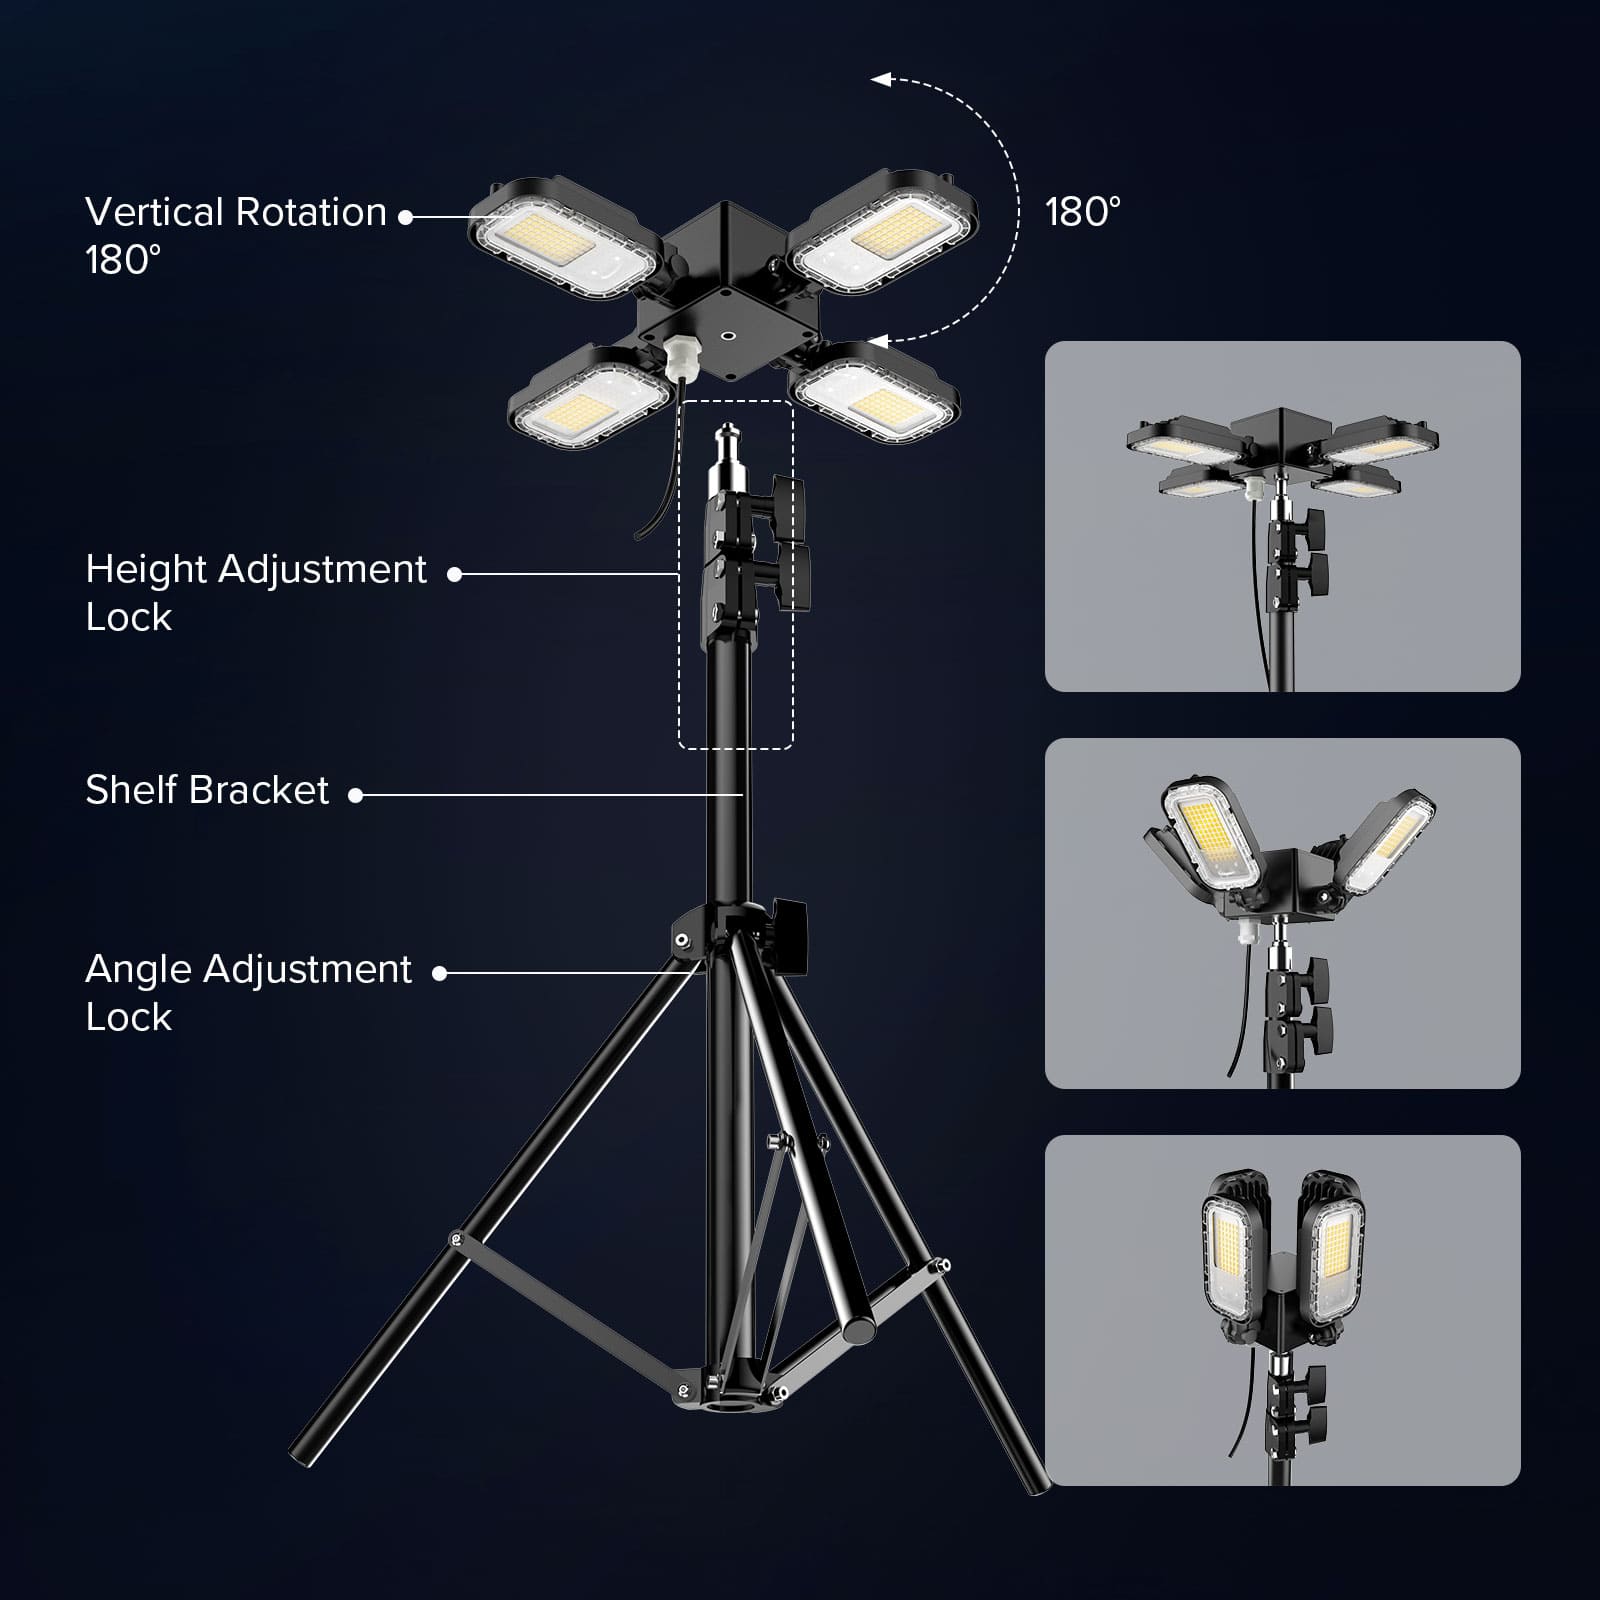 100W Adjustable 4-Head Work Light with Stand with vertical rotation 180°.